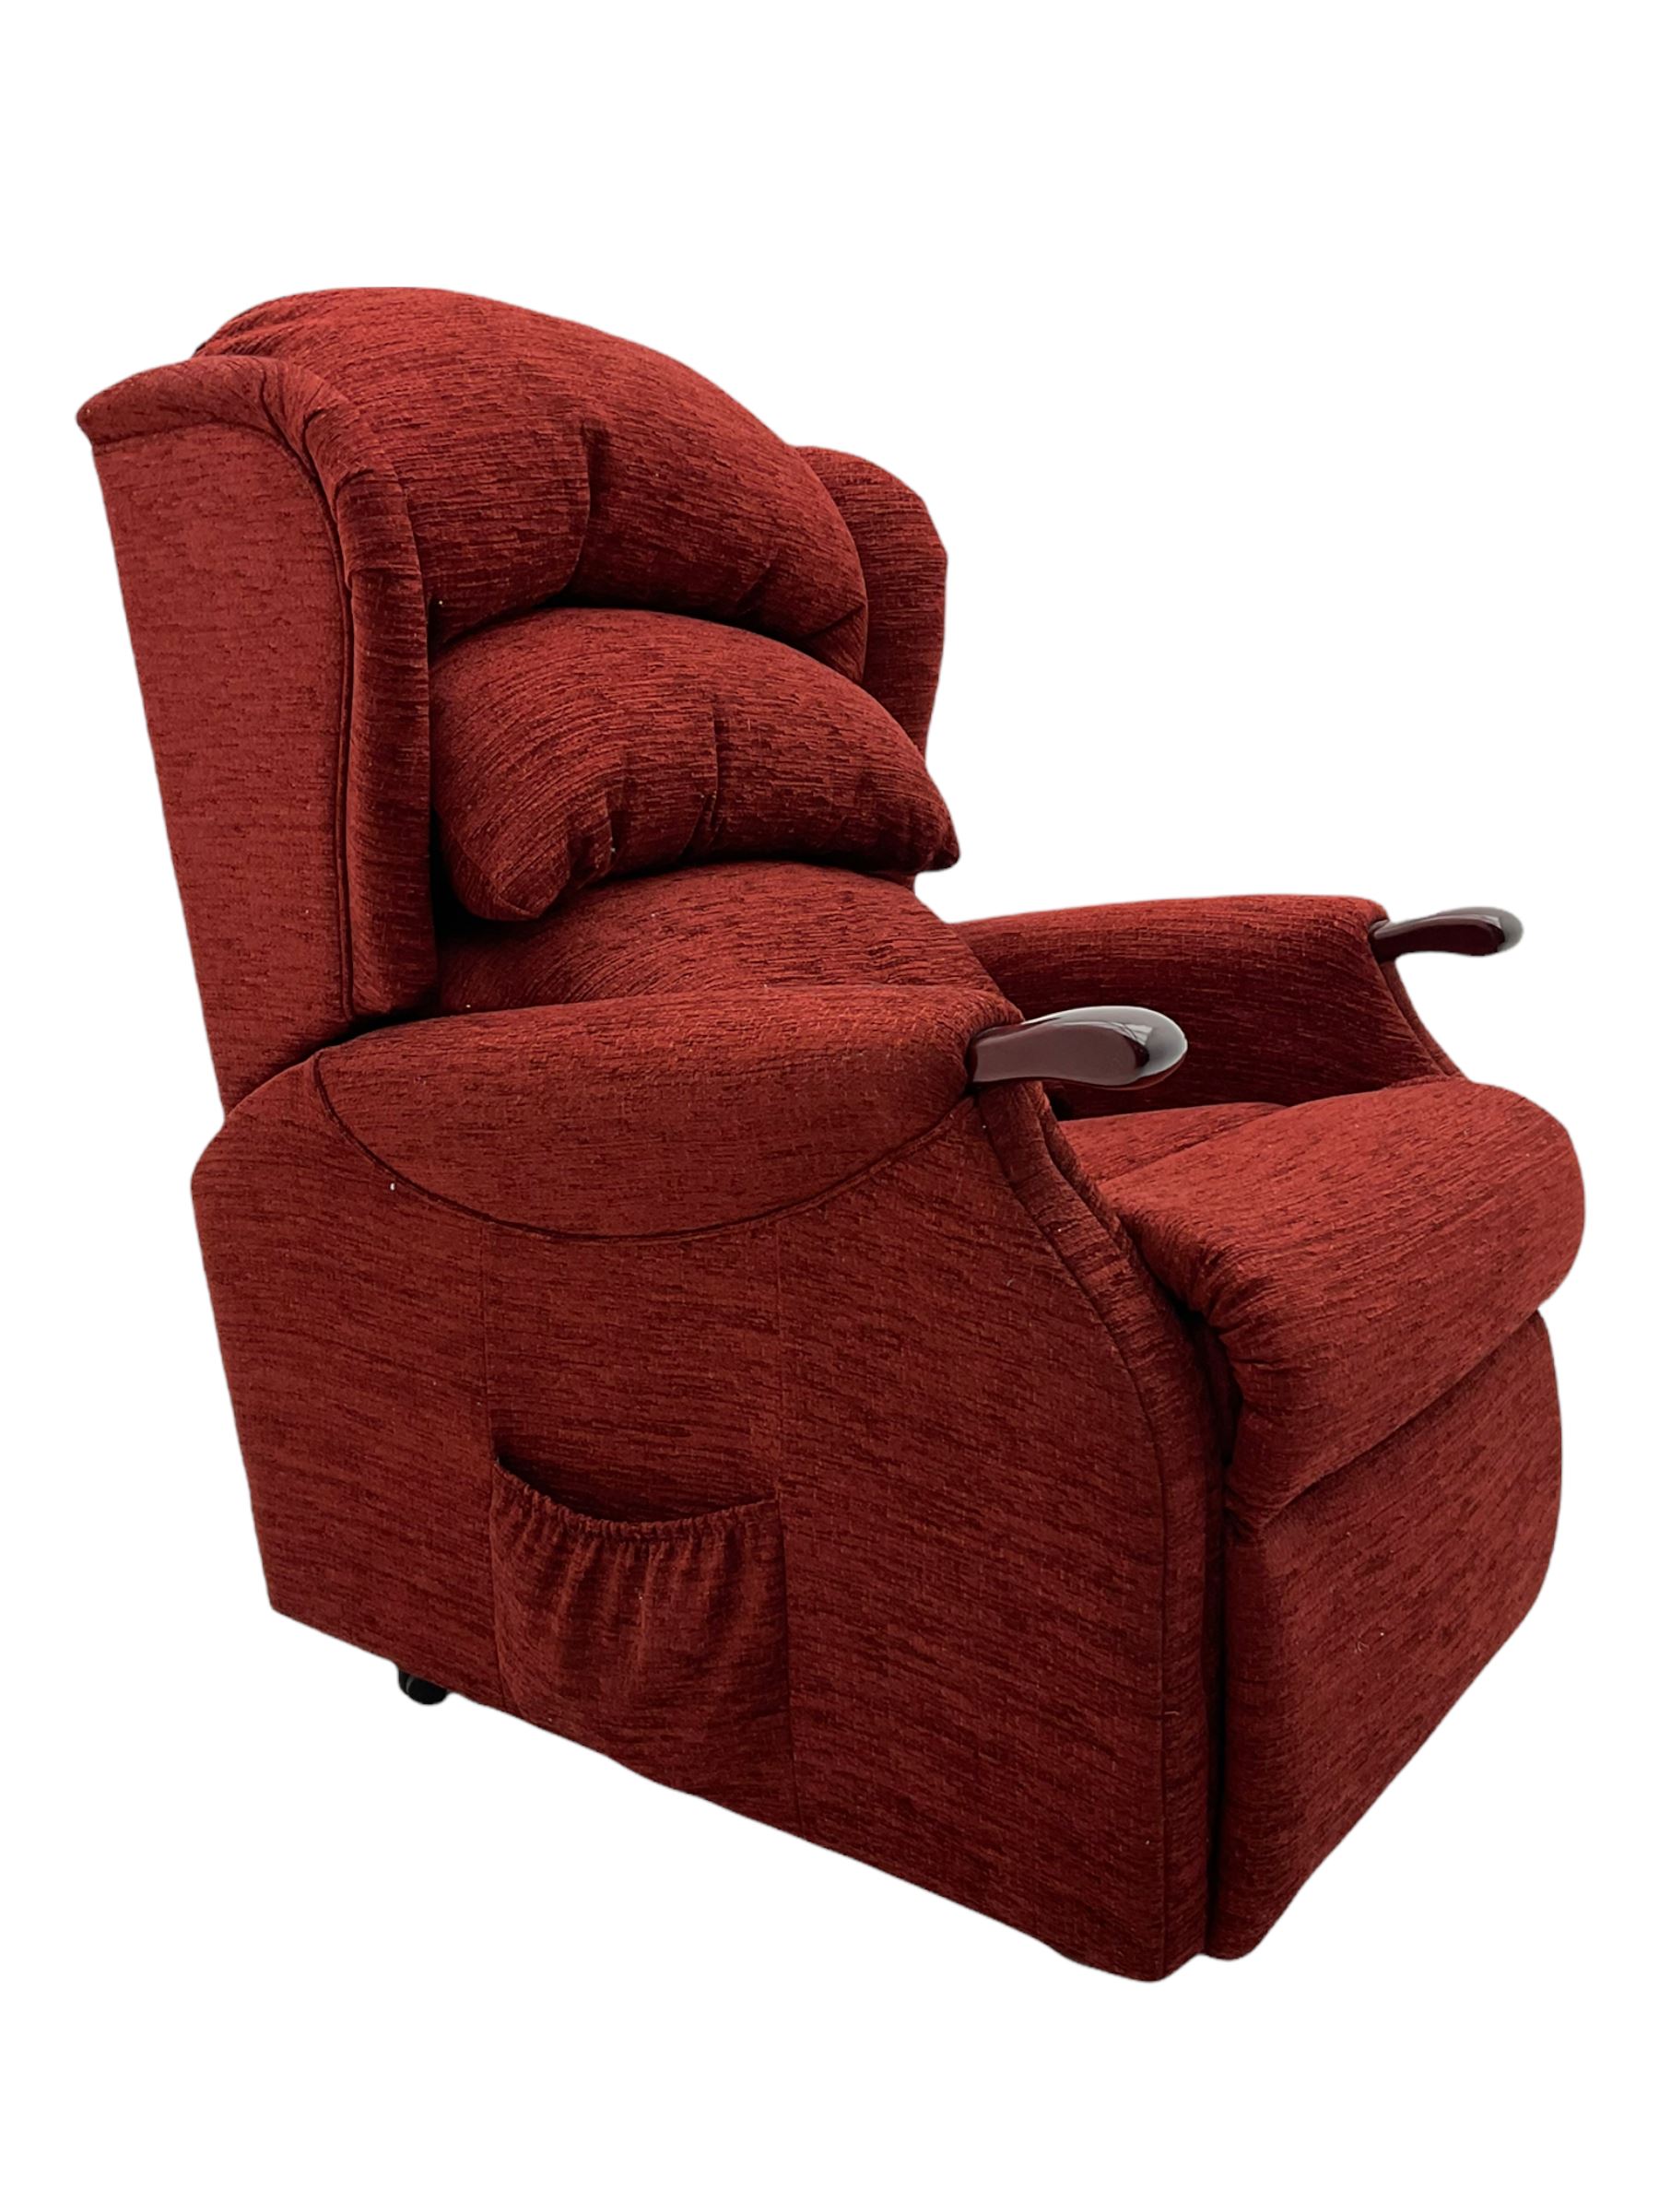 HSL electric reclining armchair - Image 3 of 5